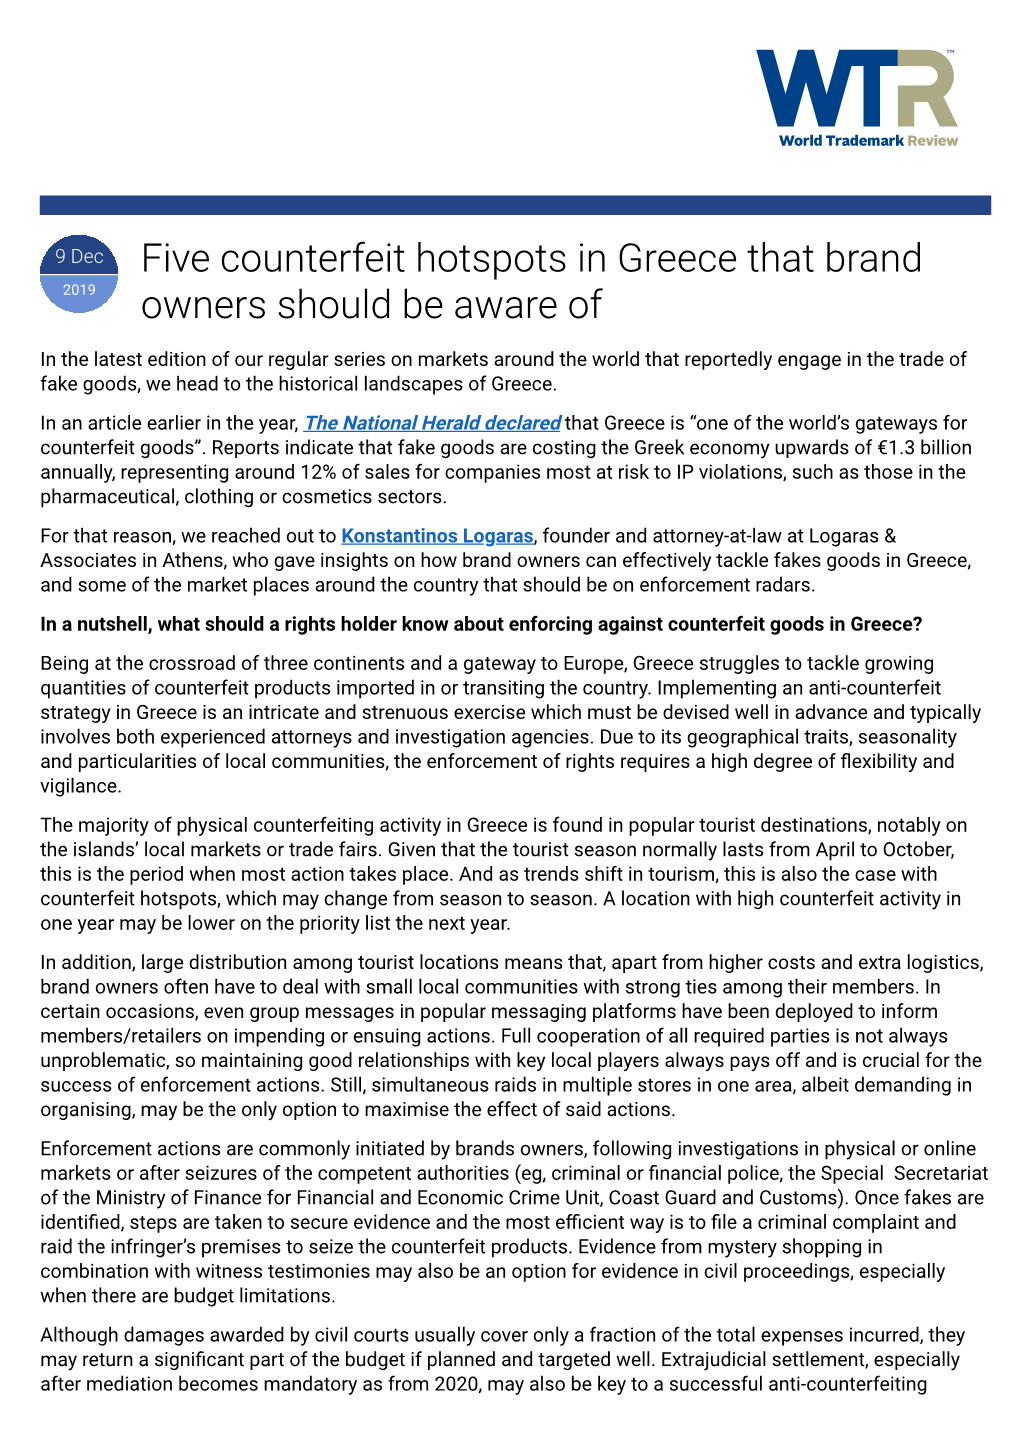 Five Counterfeit Hotspots in Greece That Brand Owners Should Be Aware Of